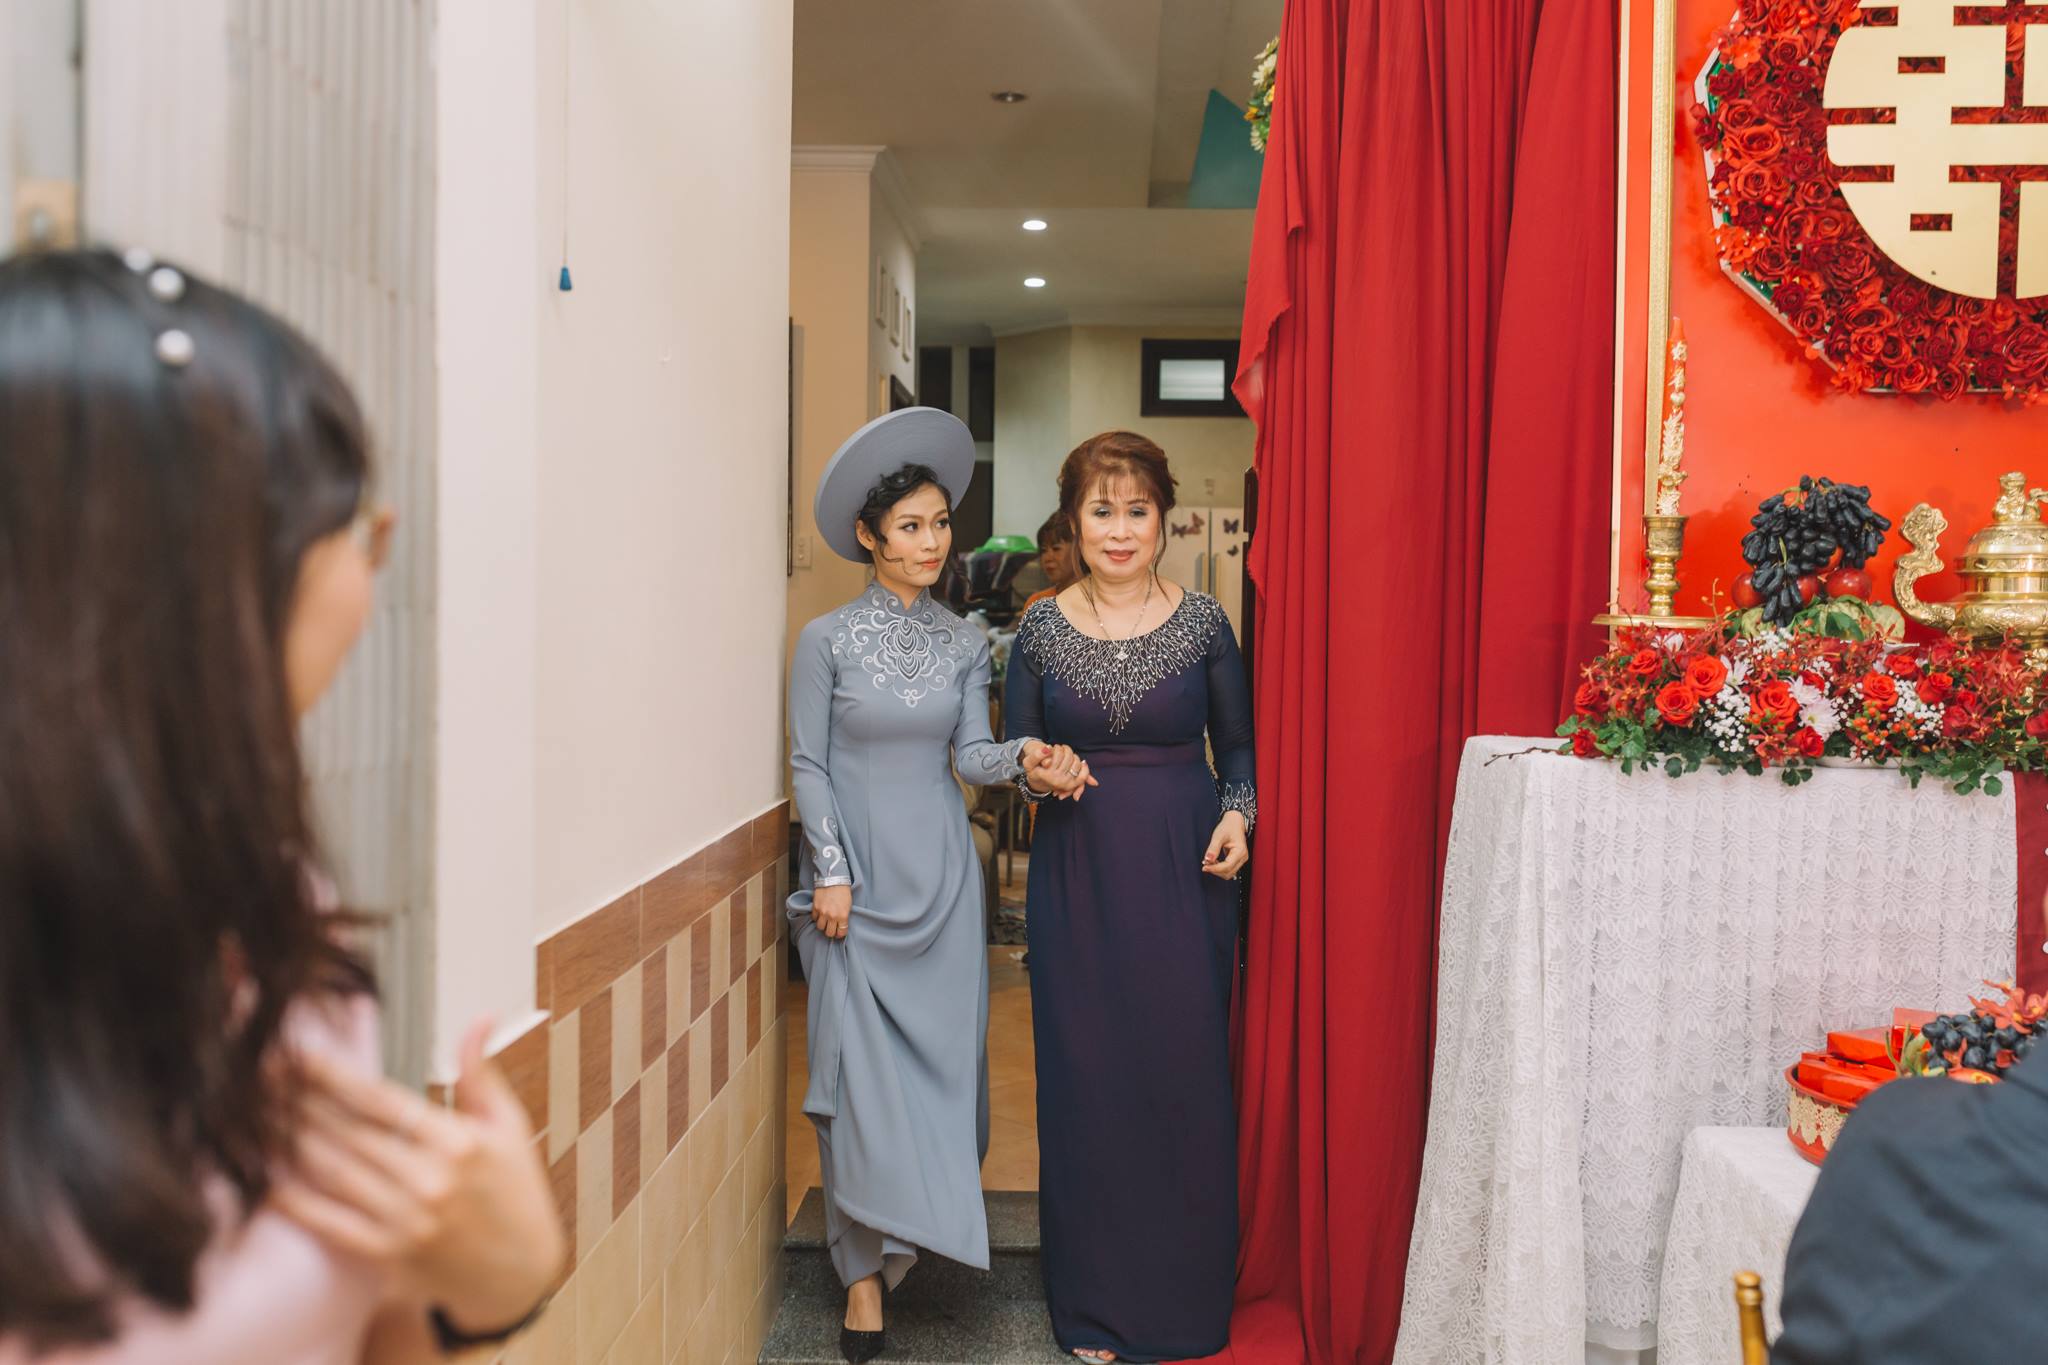 the bride’s mother will walk her daughter to the ceremony room and hand her over to the groom